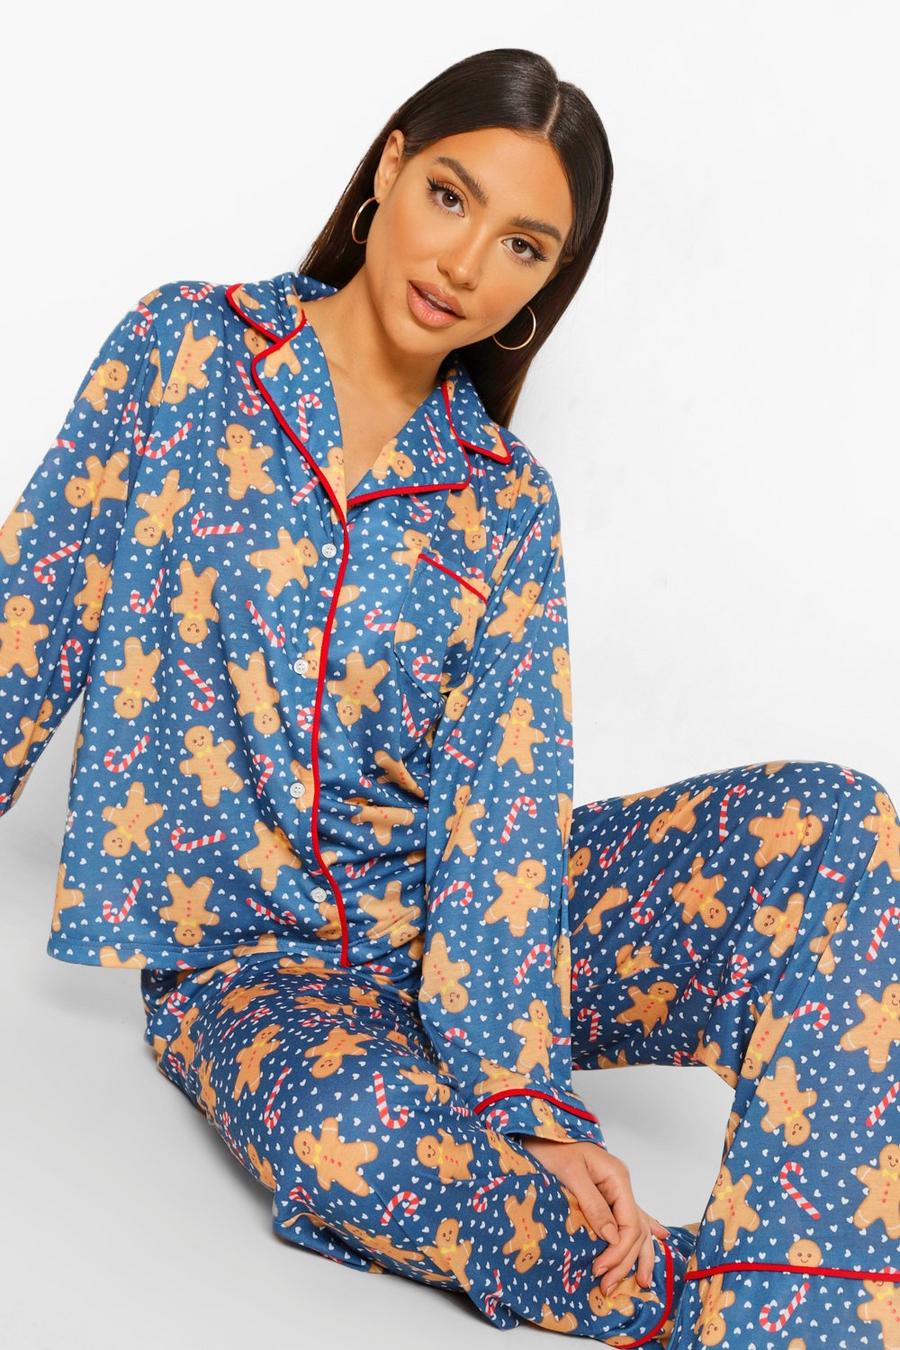 Black Mix and Match Gingerbread Man PJ Trousers